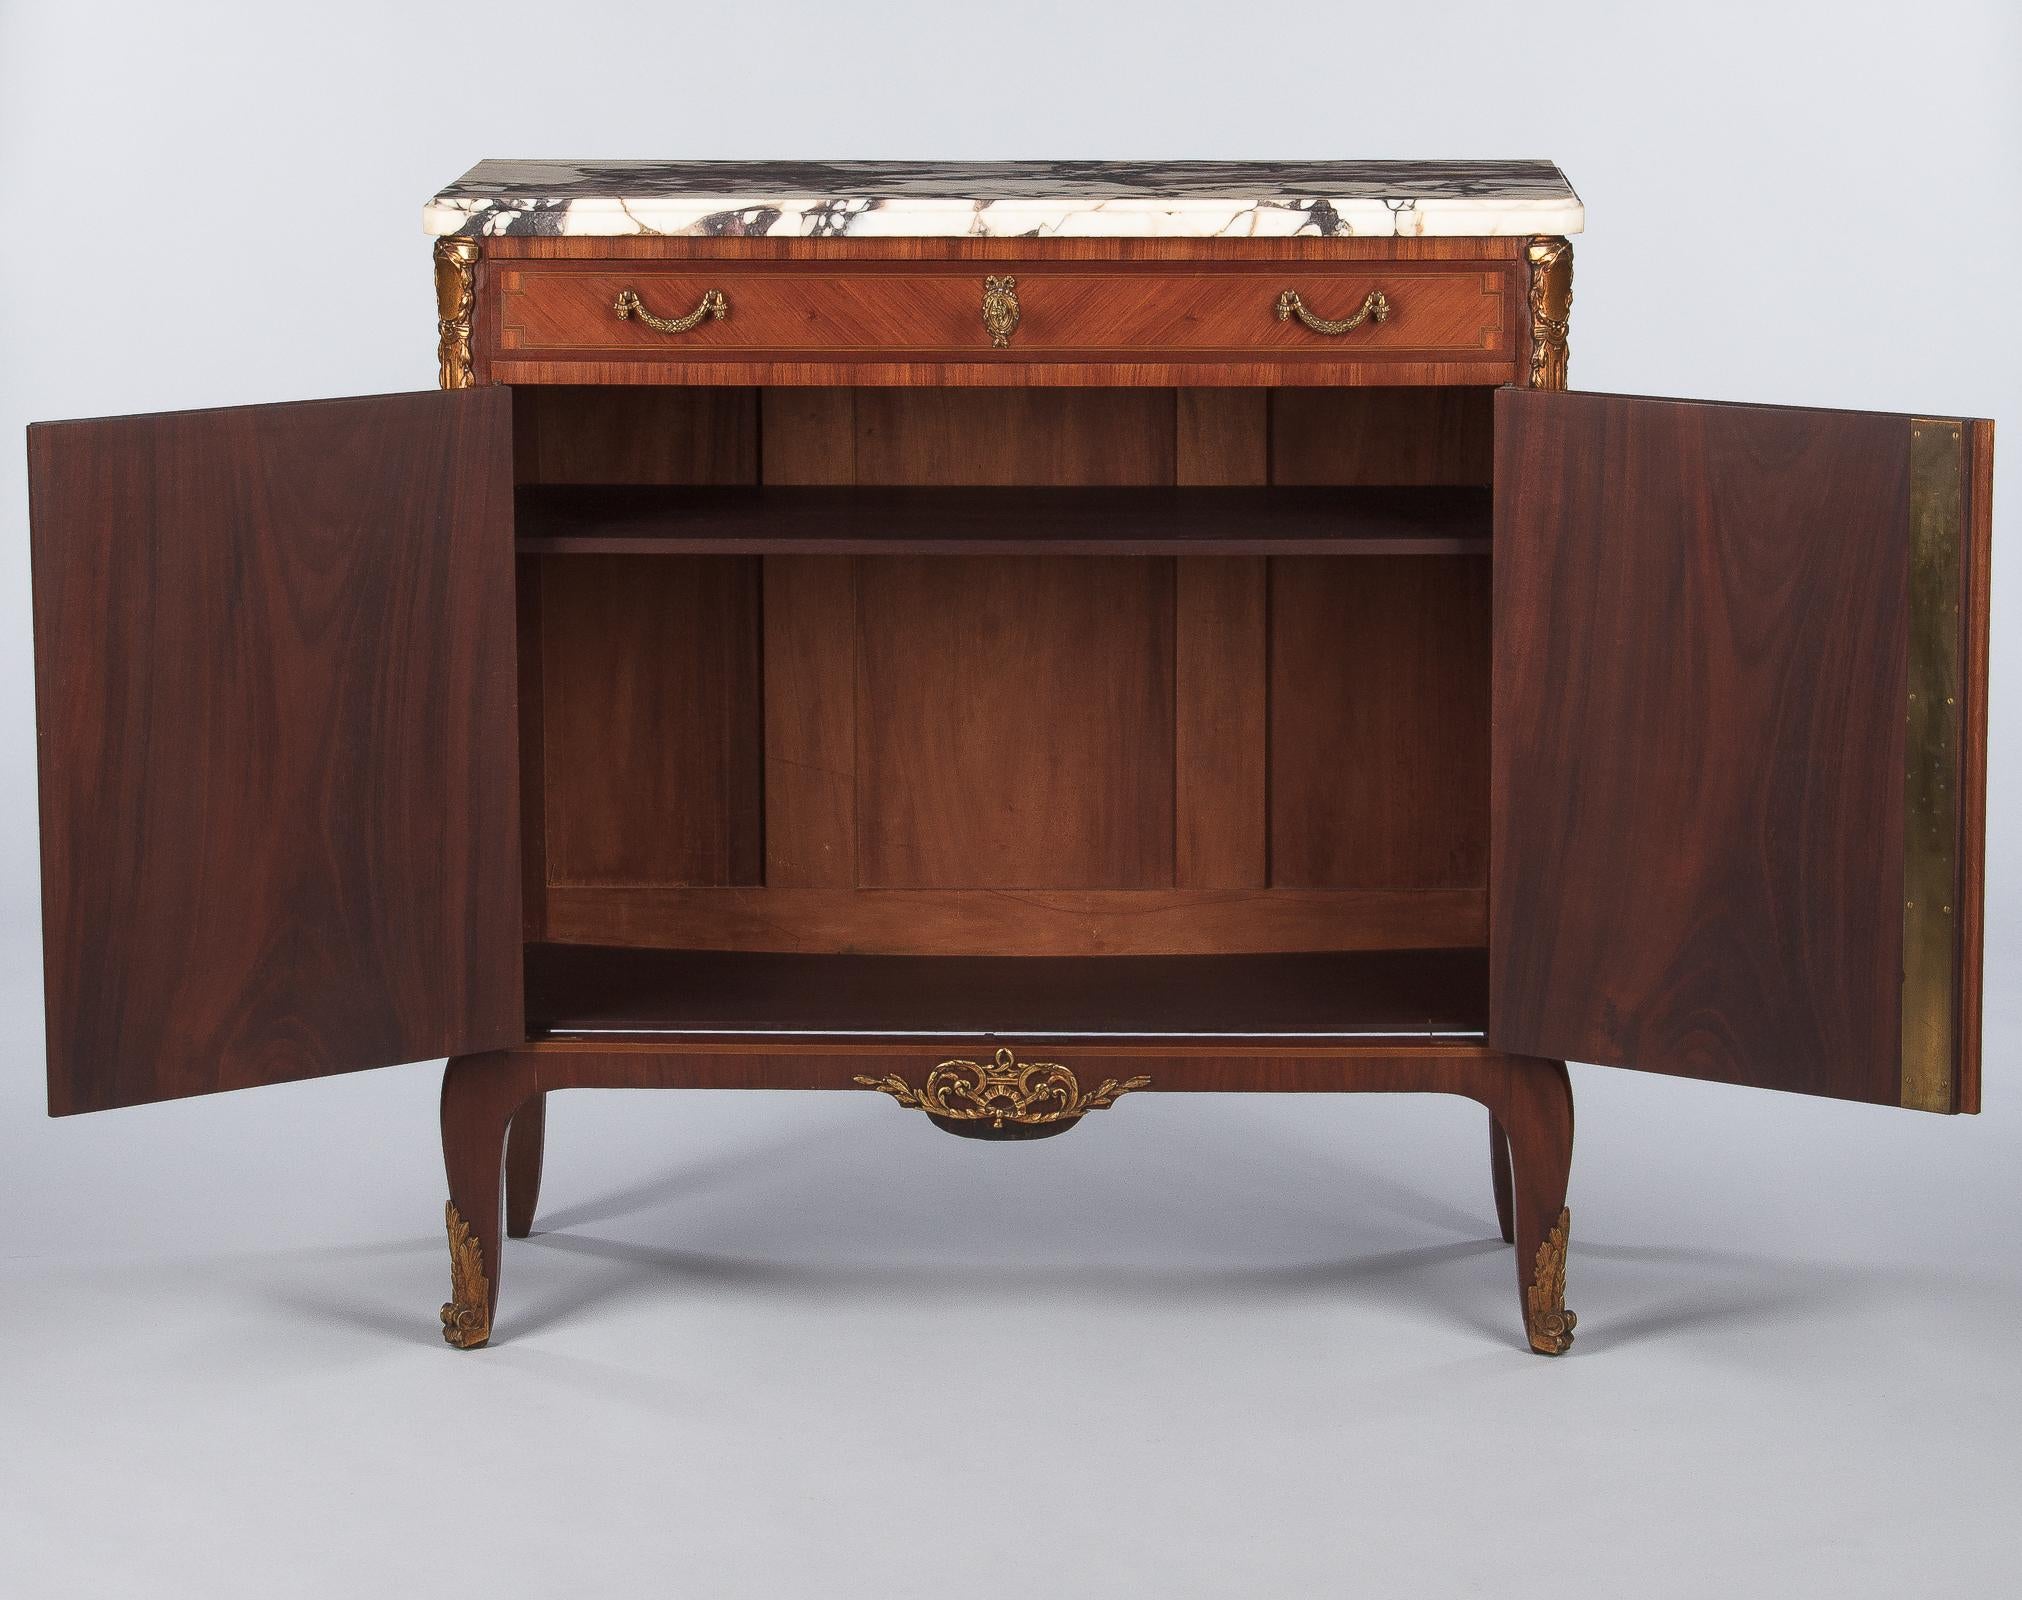 French Transition Style Marquetry Sideboard with Marble Top, 1900s (Louis XVI.)